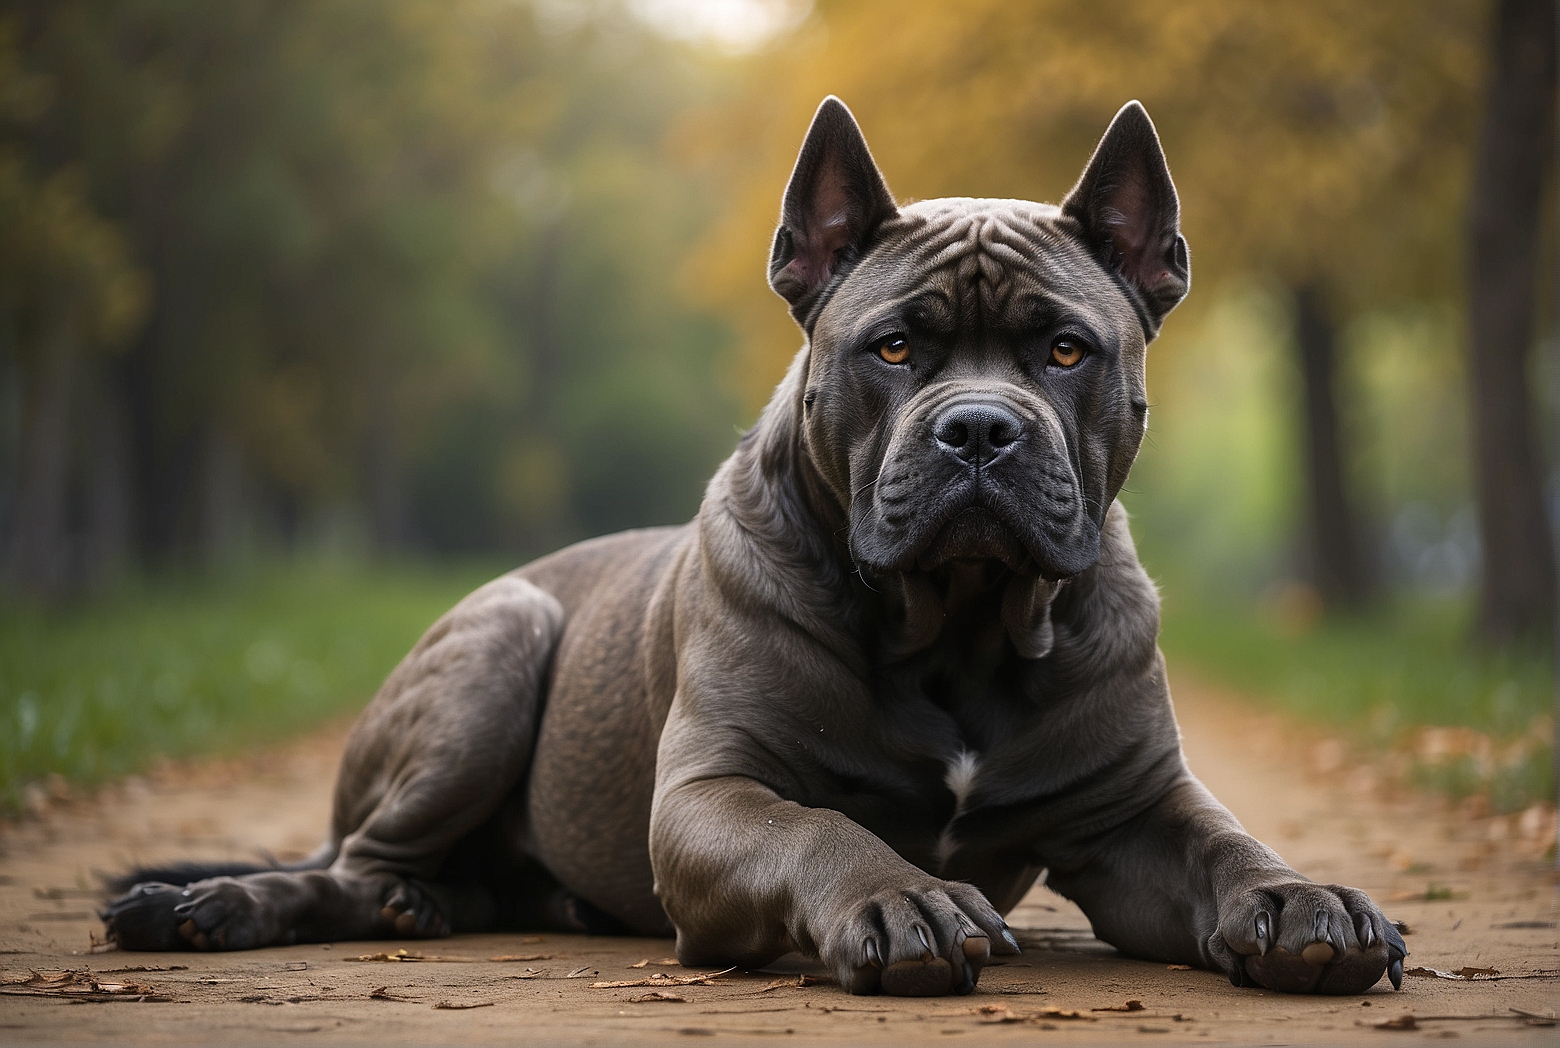 Should You Crop Your Cane Corso’s Ears?